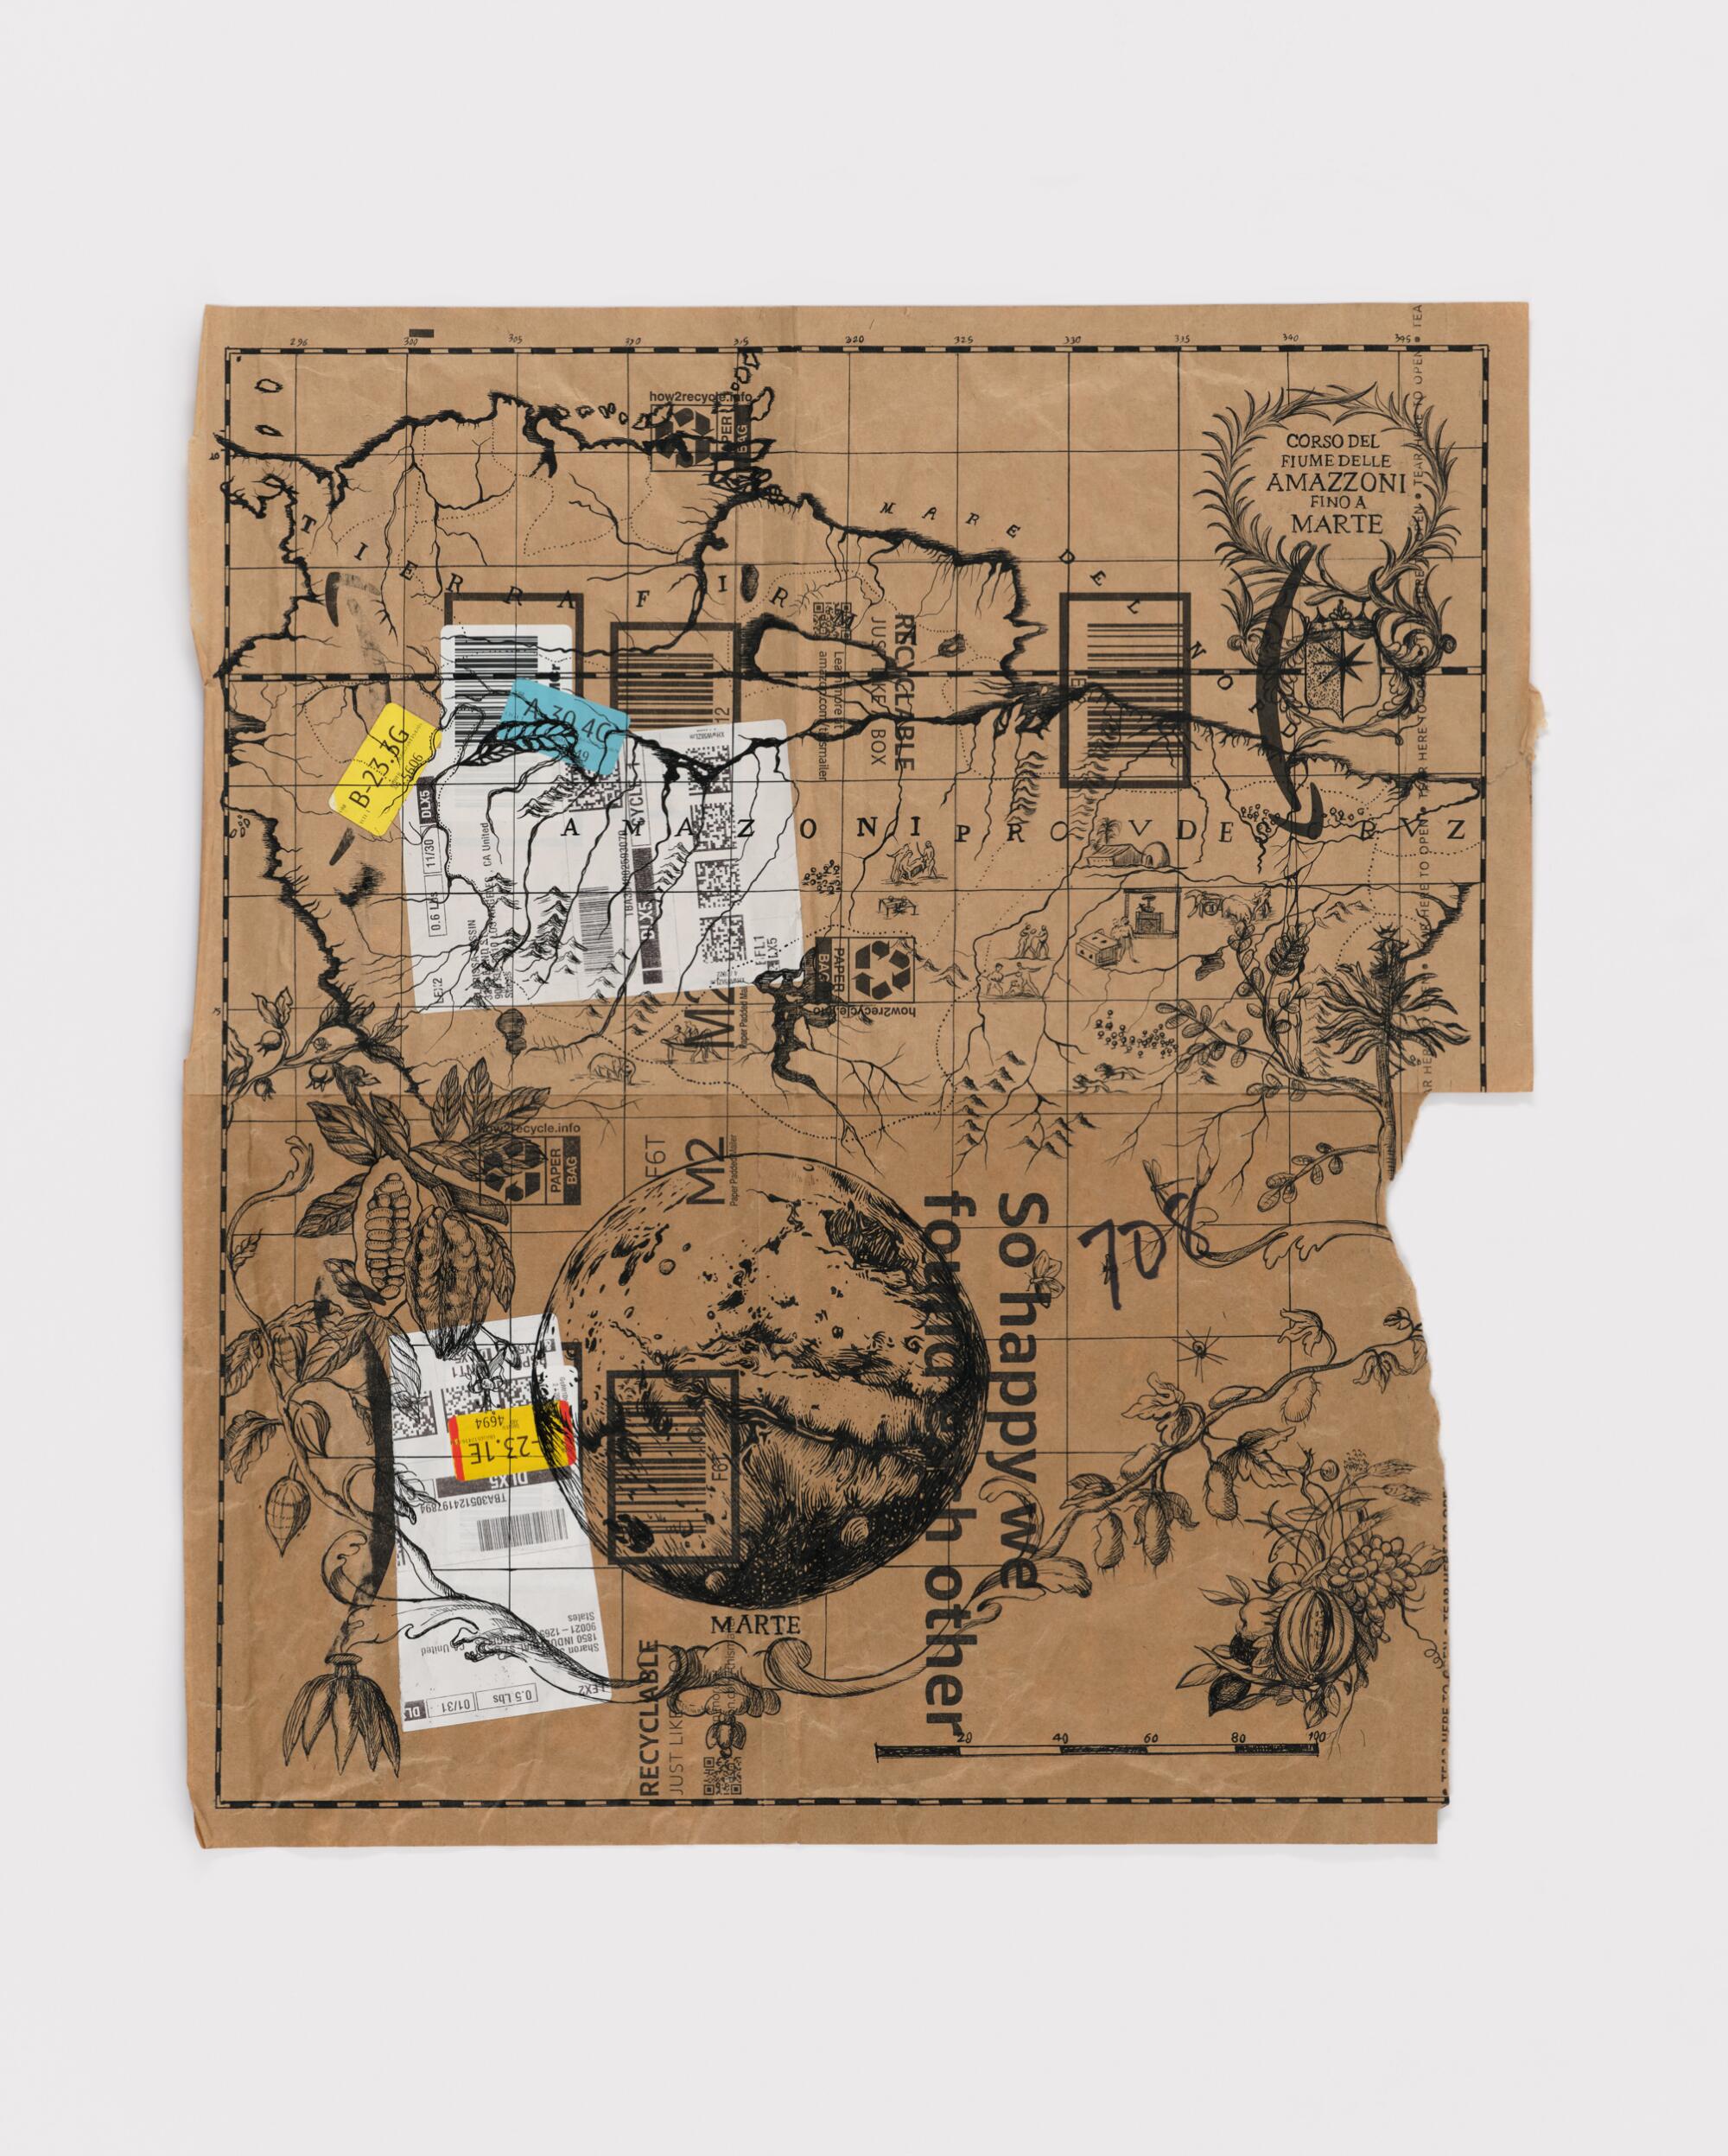 A drawing of maps, plants, and Martian lands on a brown Amazon envelope 